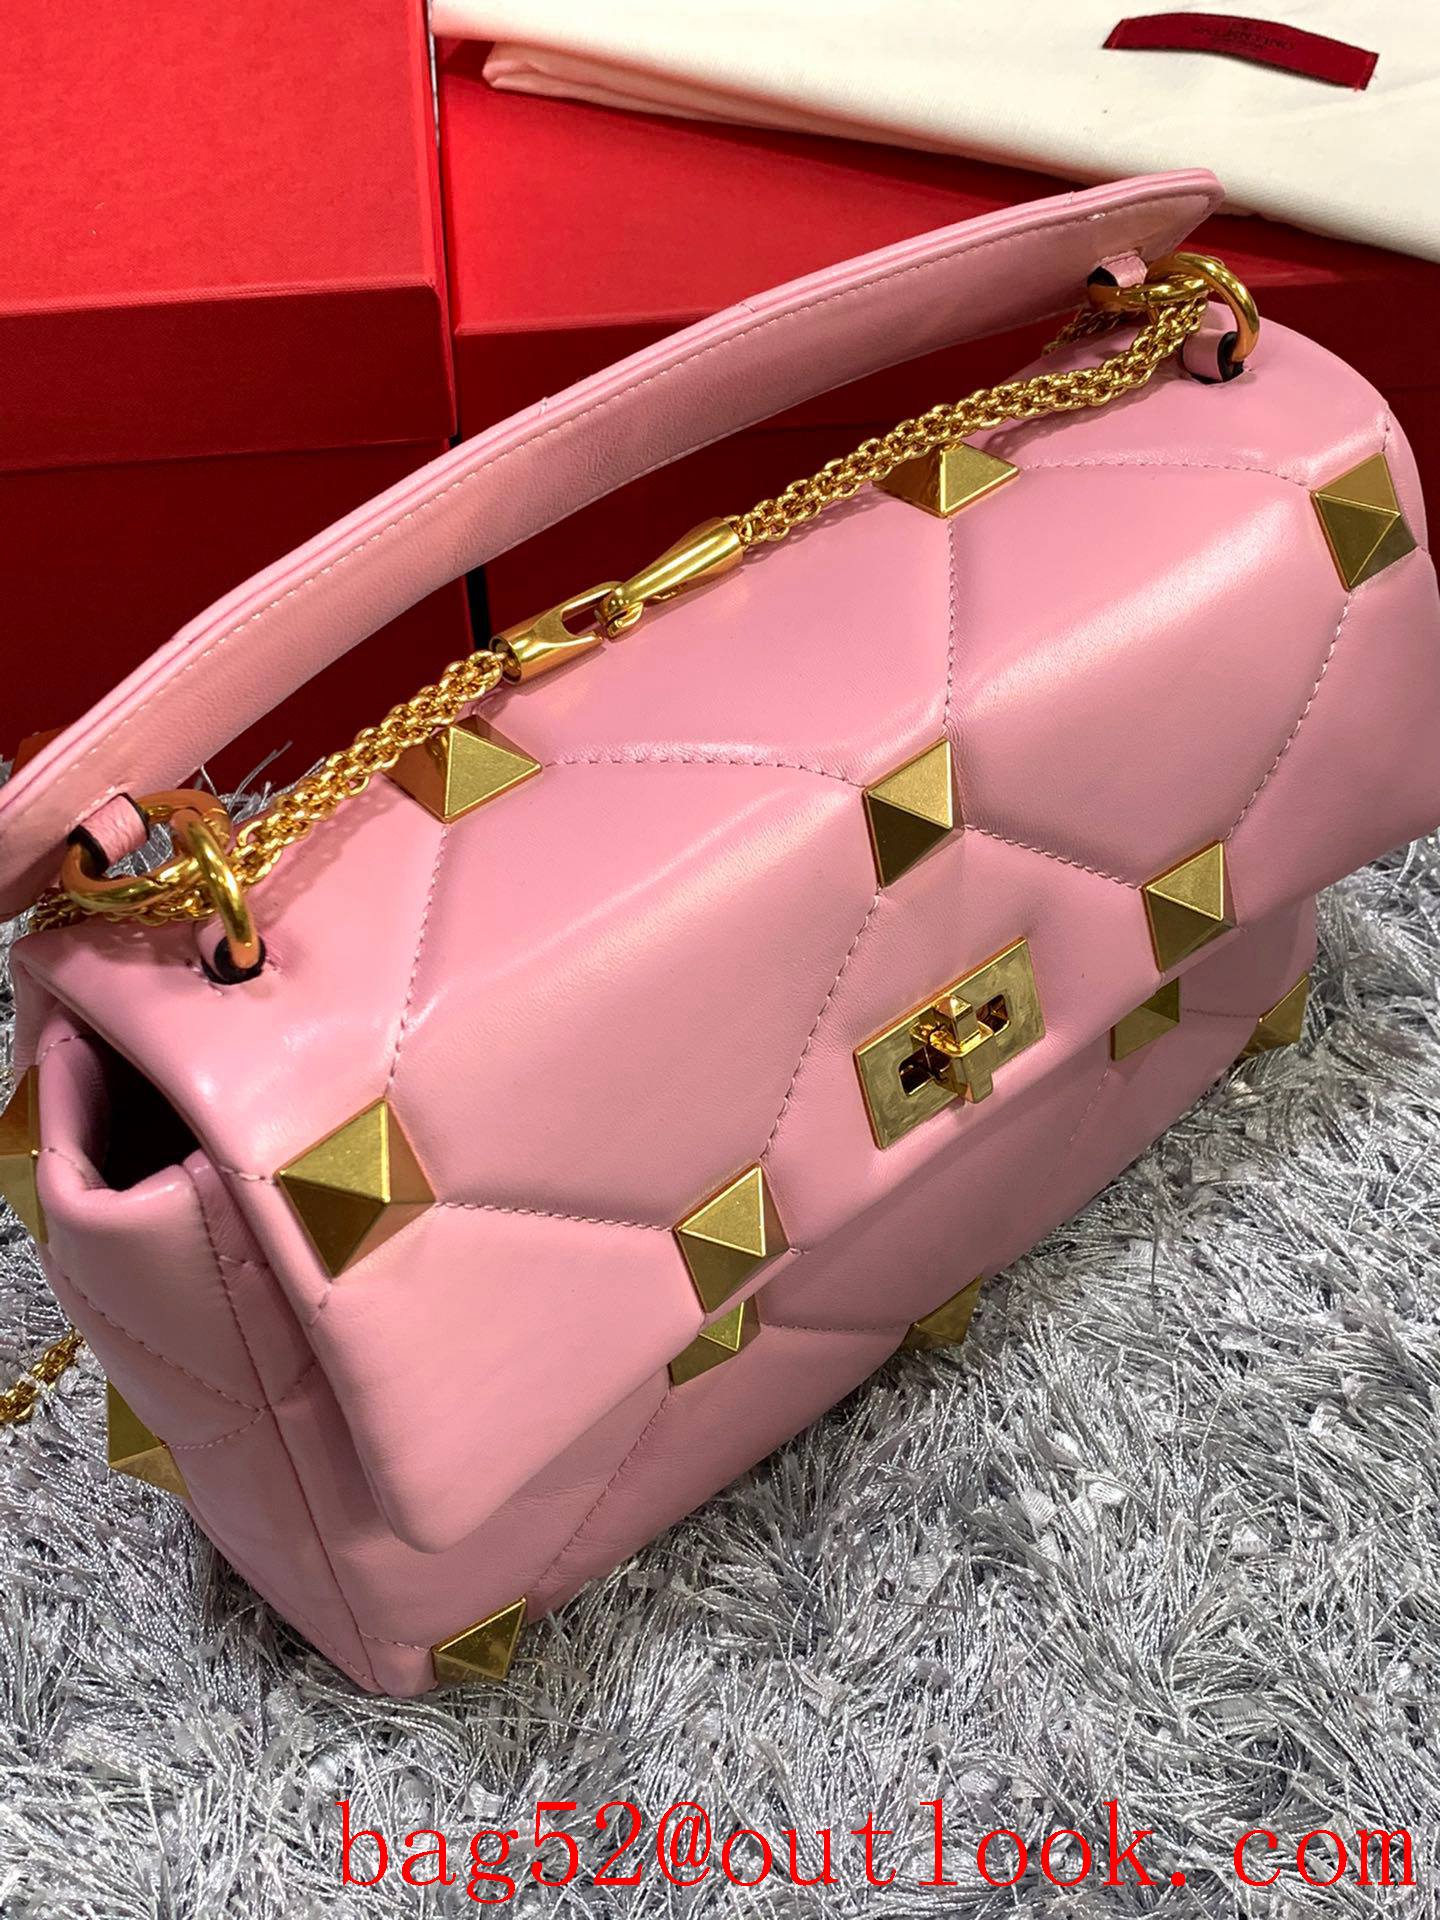 Valentino Large Roman Stud Shoulder Bag with Chain Pink